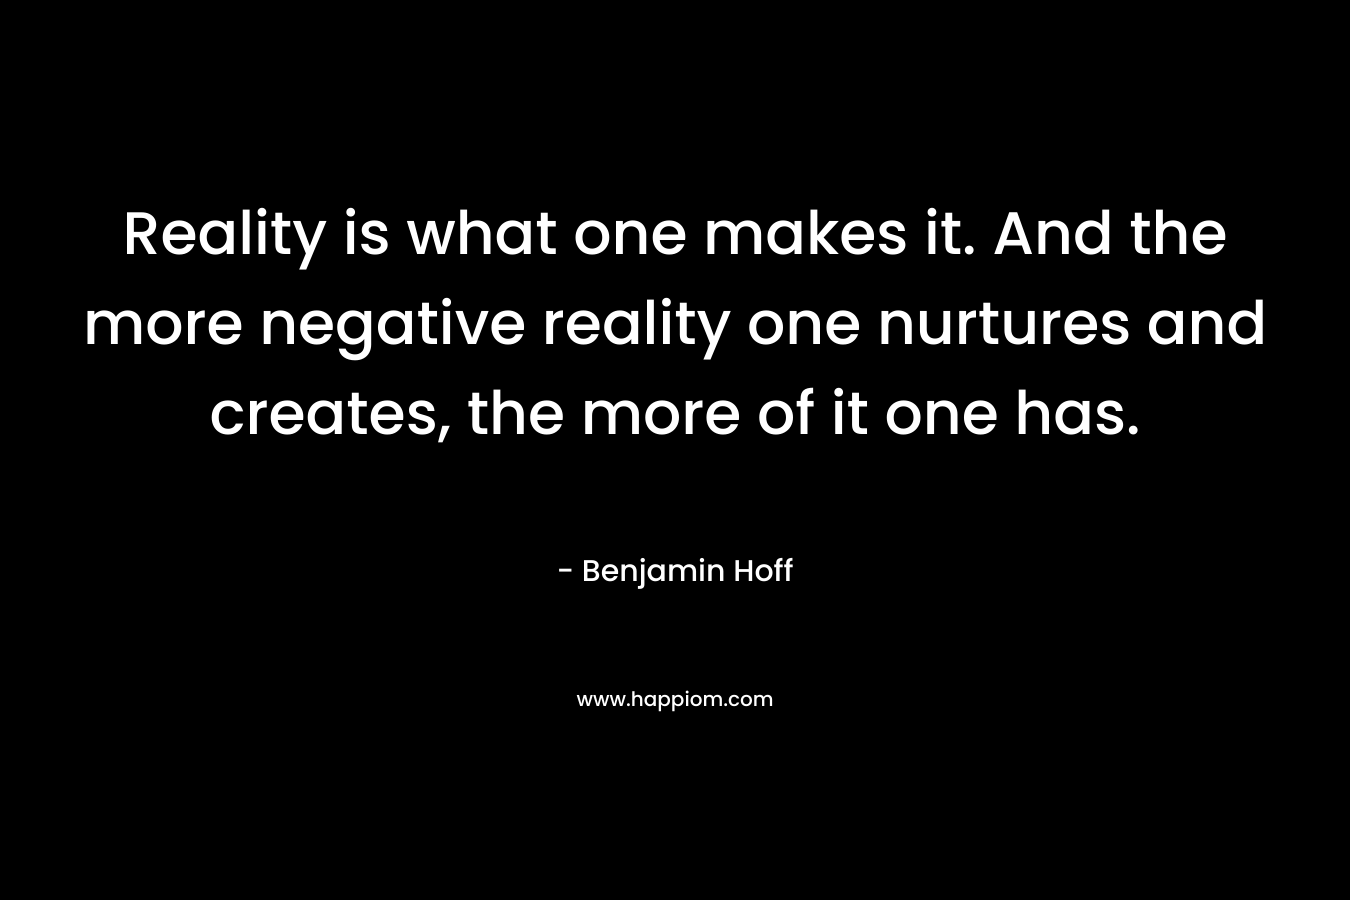 Reality is what one makes it. And the more negative reality one nurtures and creates, the more of it one has. – Benjamin Hoff